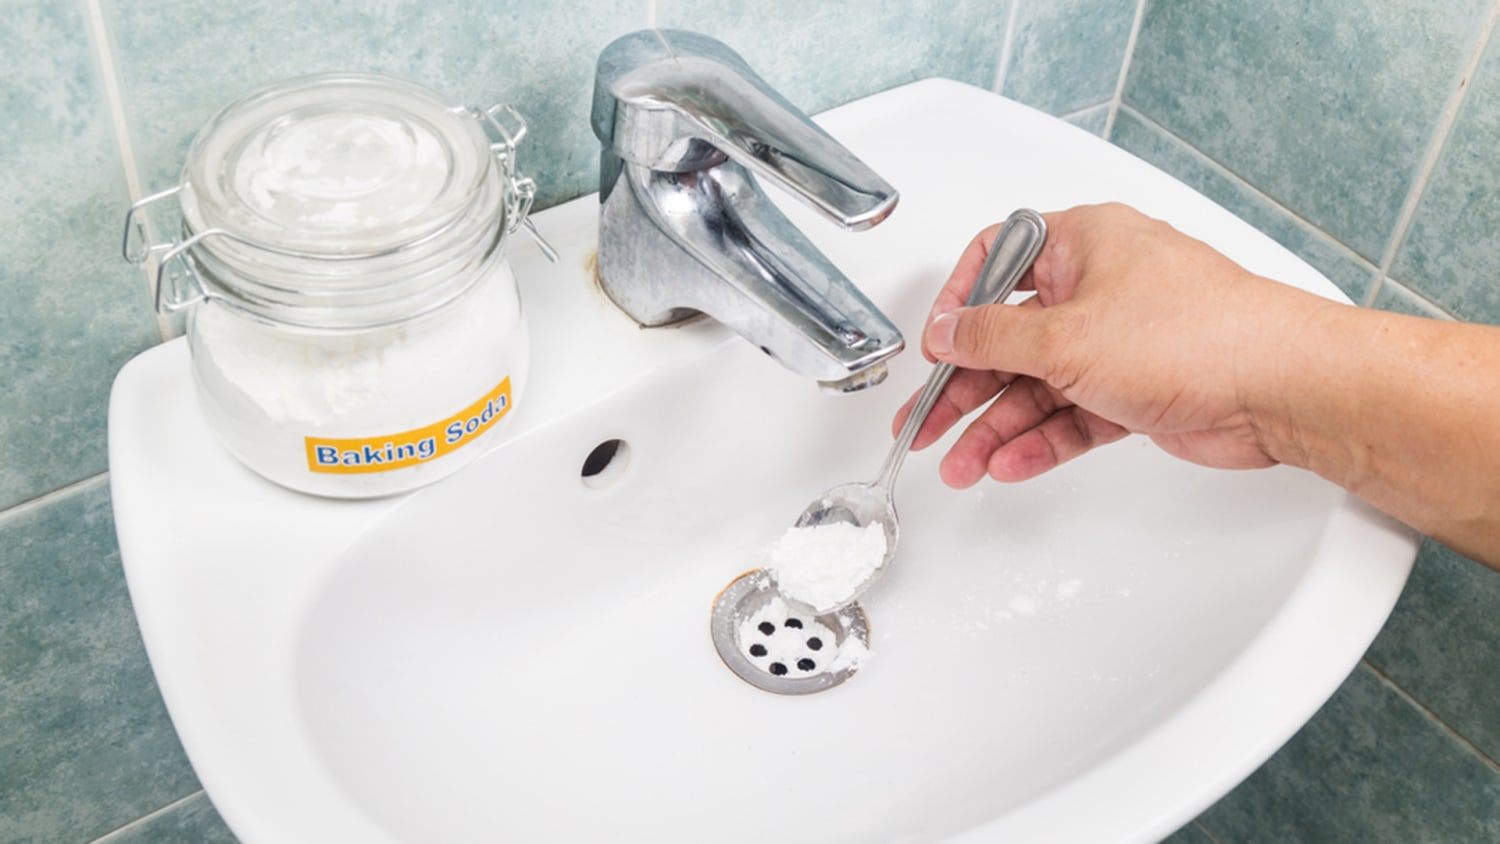 Unclog A Drain Without Calling Plumber, How To Clean Bathtub Drain With Baking Soda